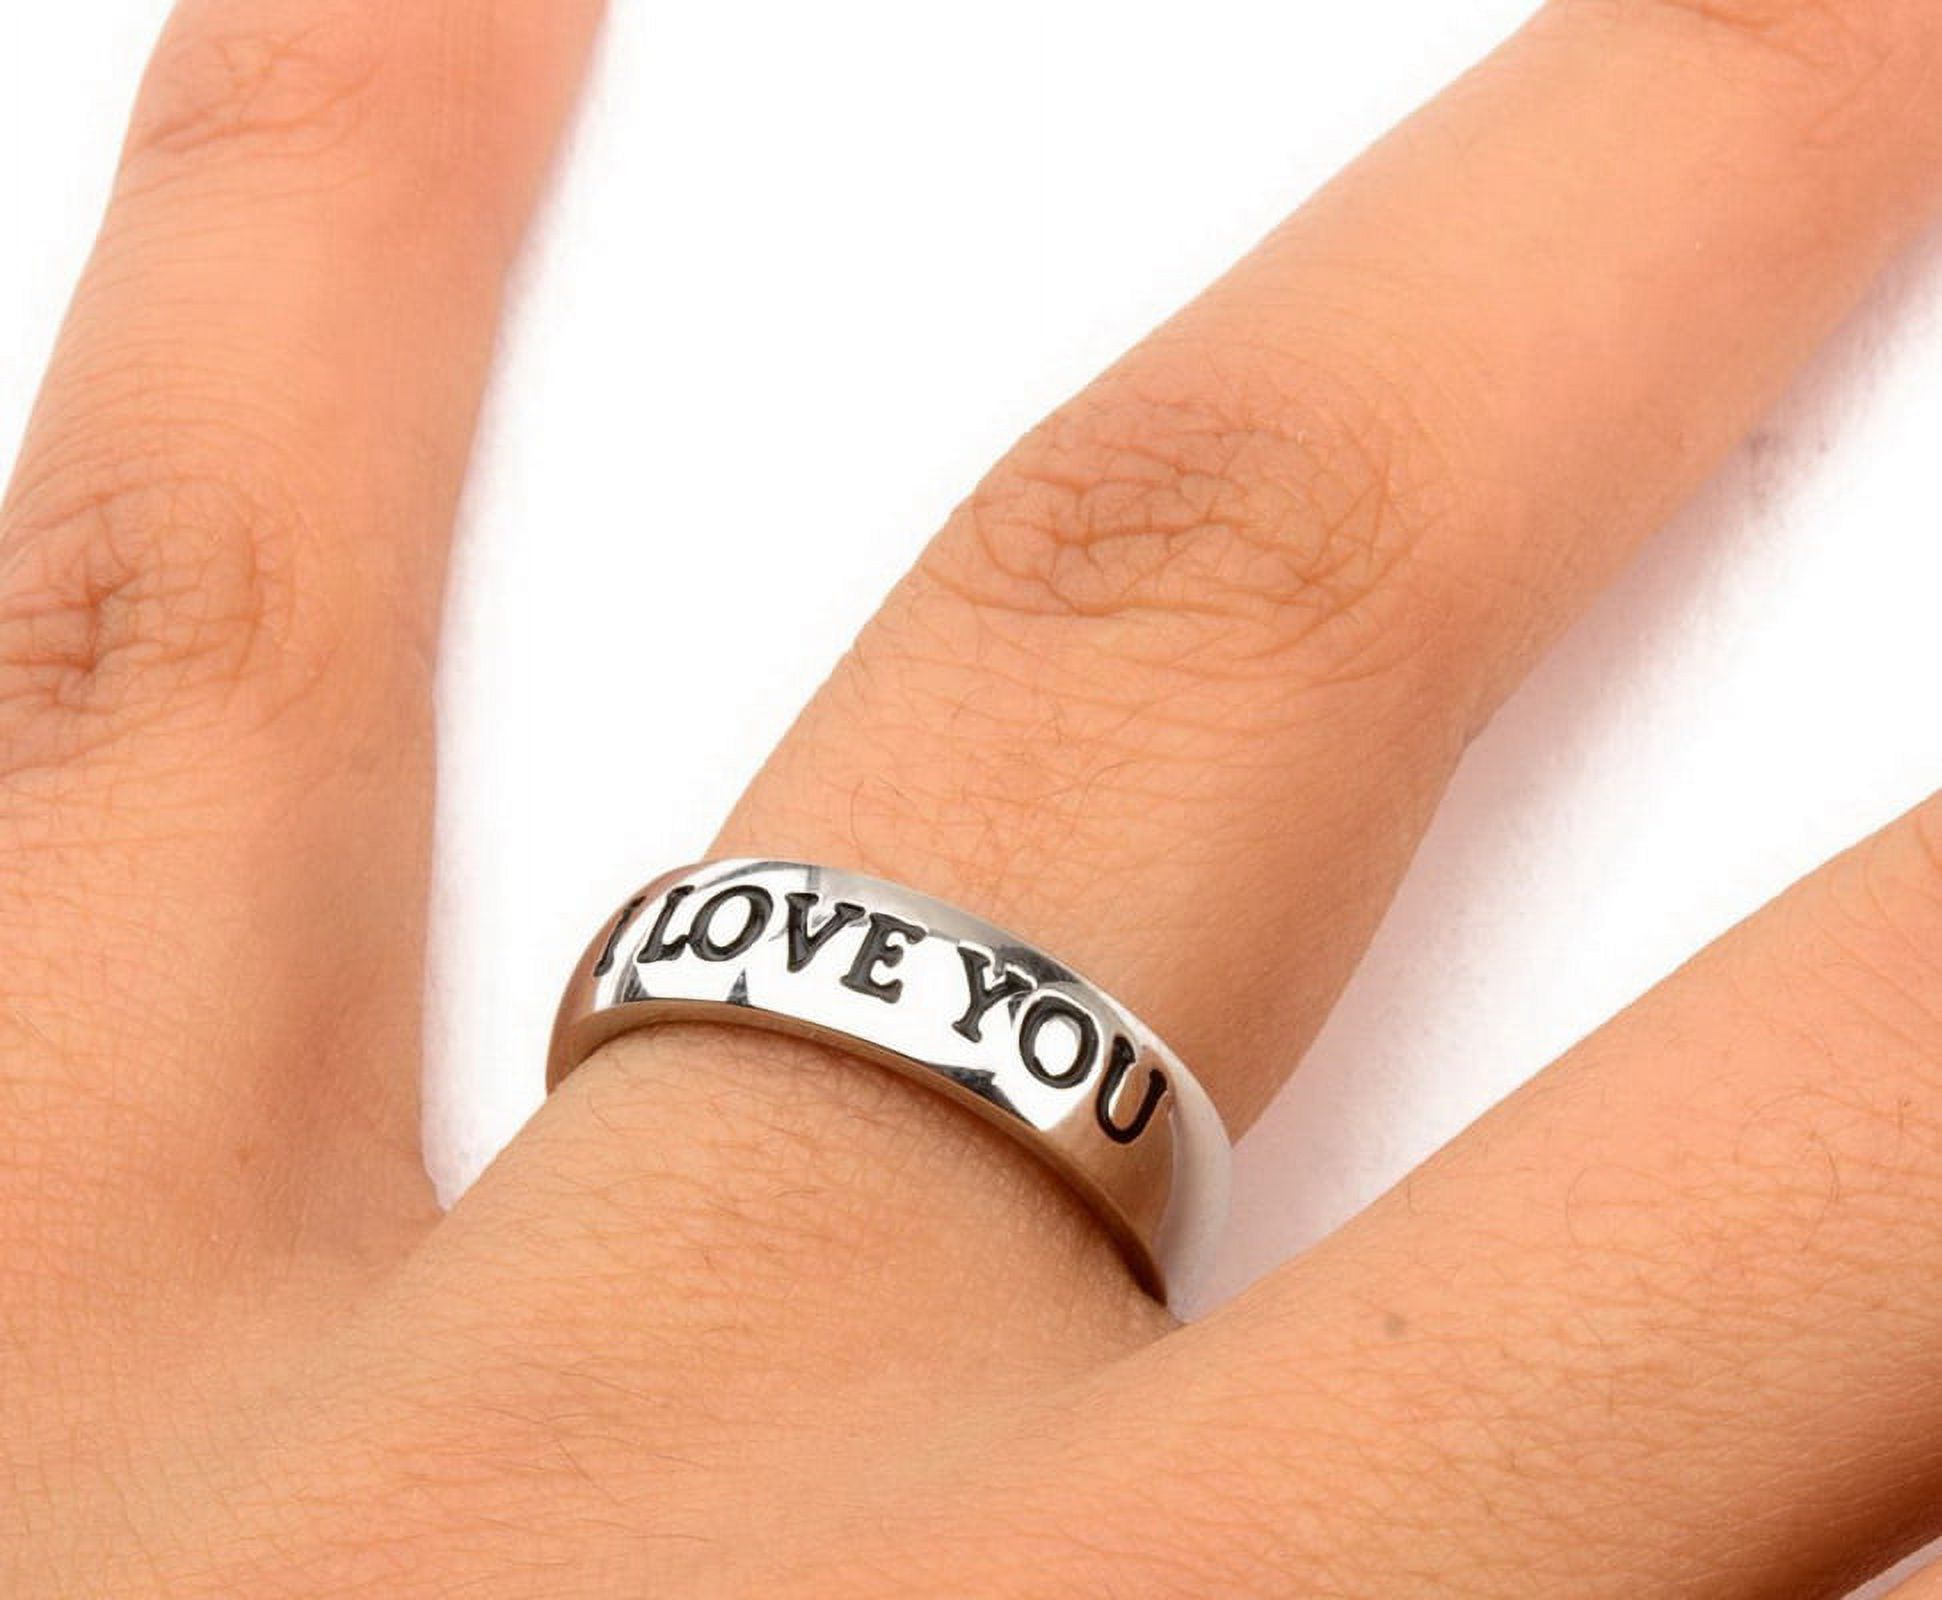 Star Wars I Love You Stainless Steel Unisex Ring | Size 6 - image 1 of 3